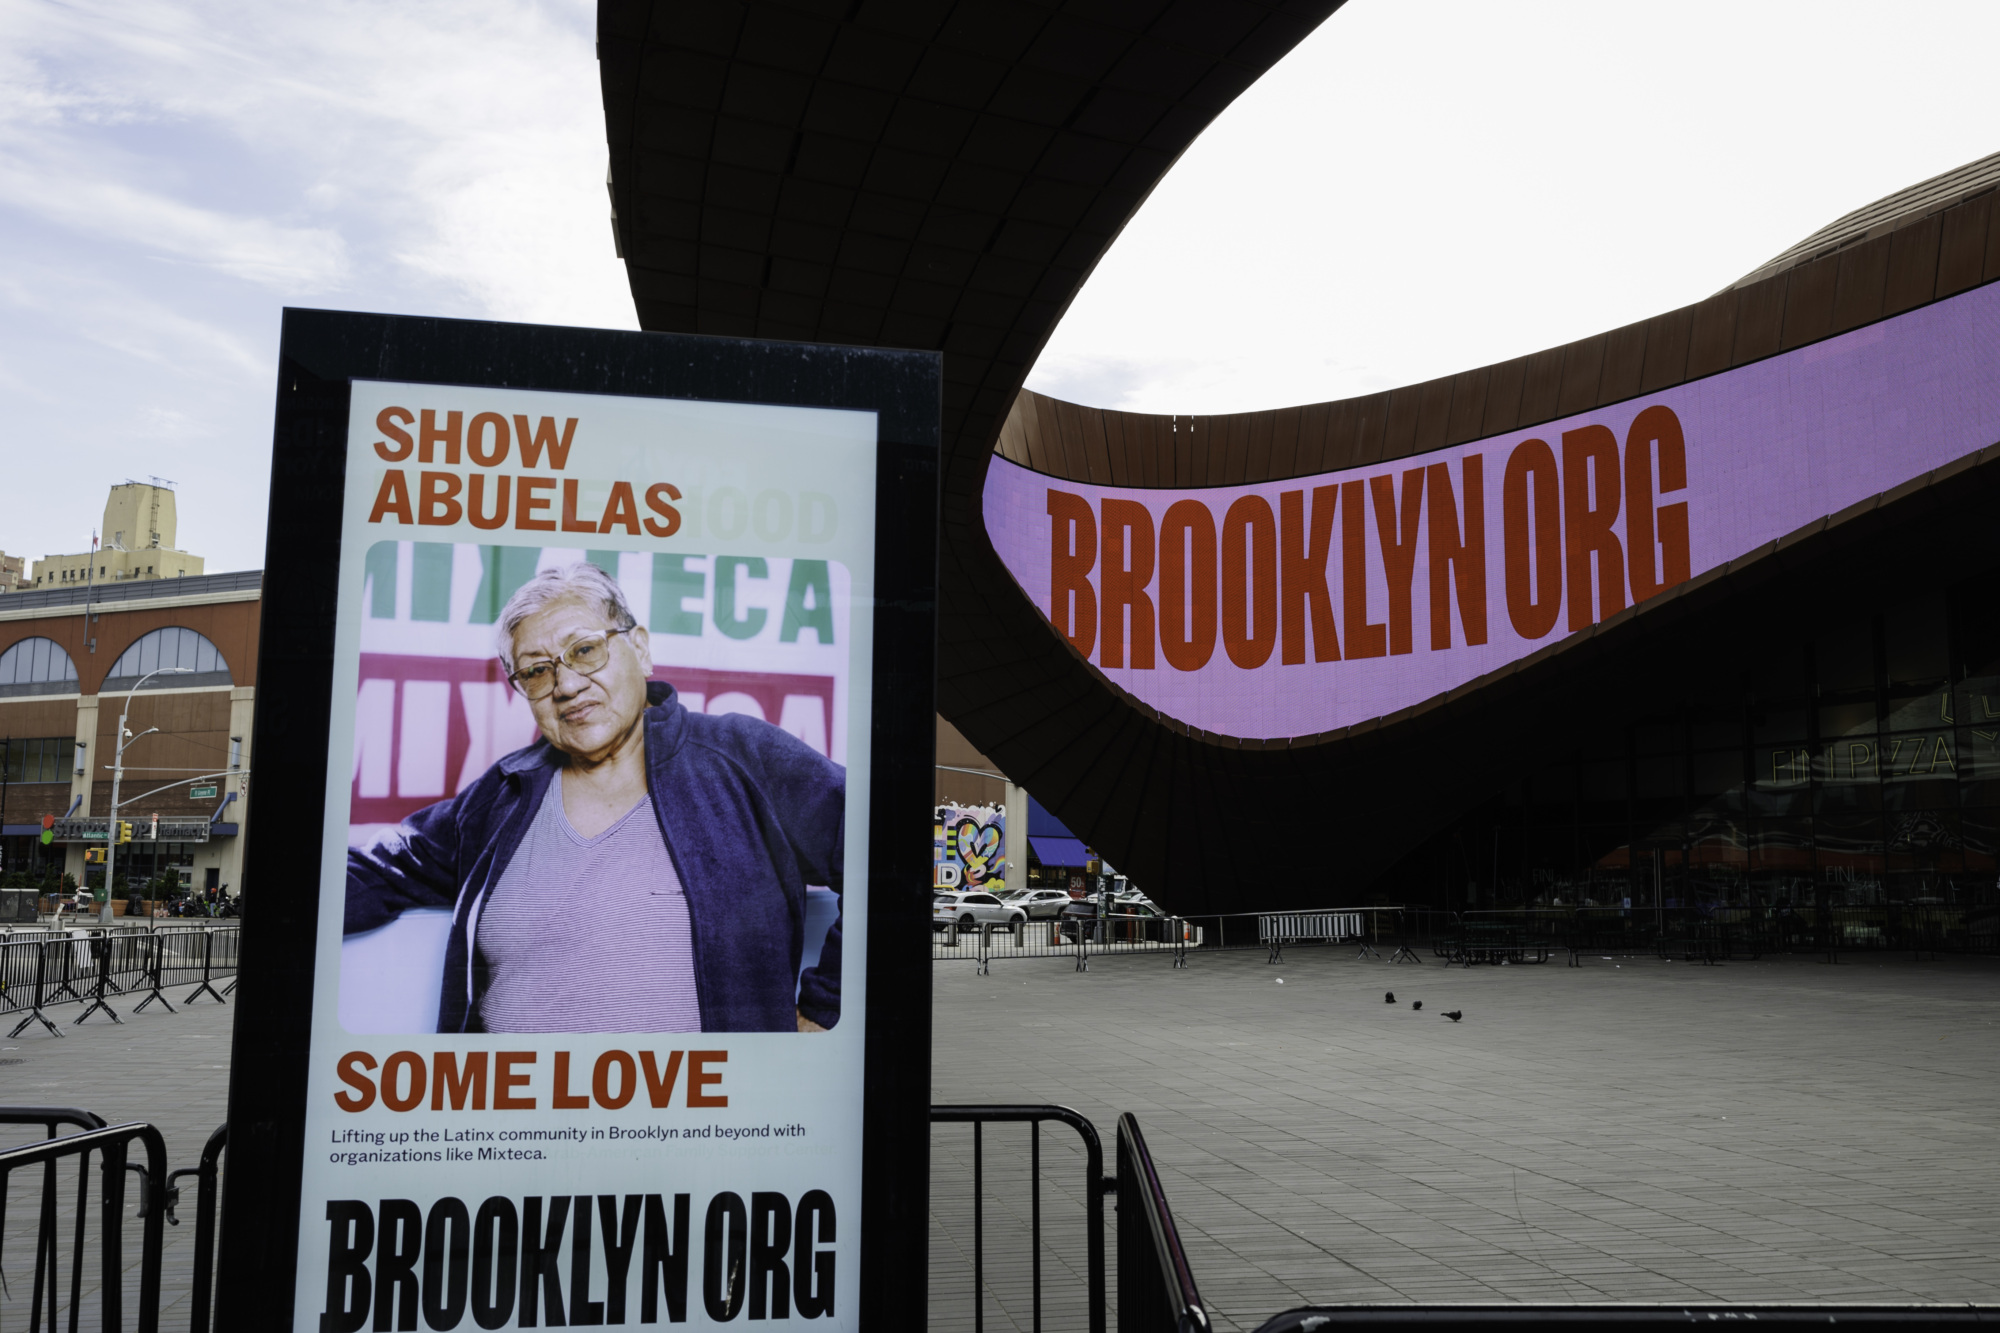 A poster showing an older woman saying "Show Abuelas Some Love" in front of the Barclays Center with a large "BROOKLYN.ORG" sign displayed on the building in Brooklyn, New York.